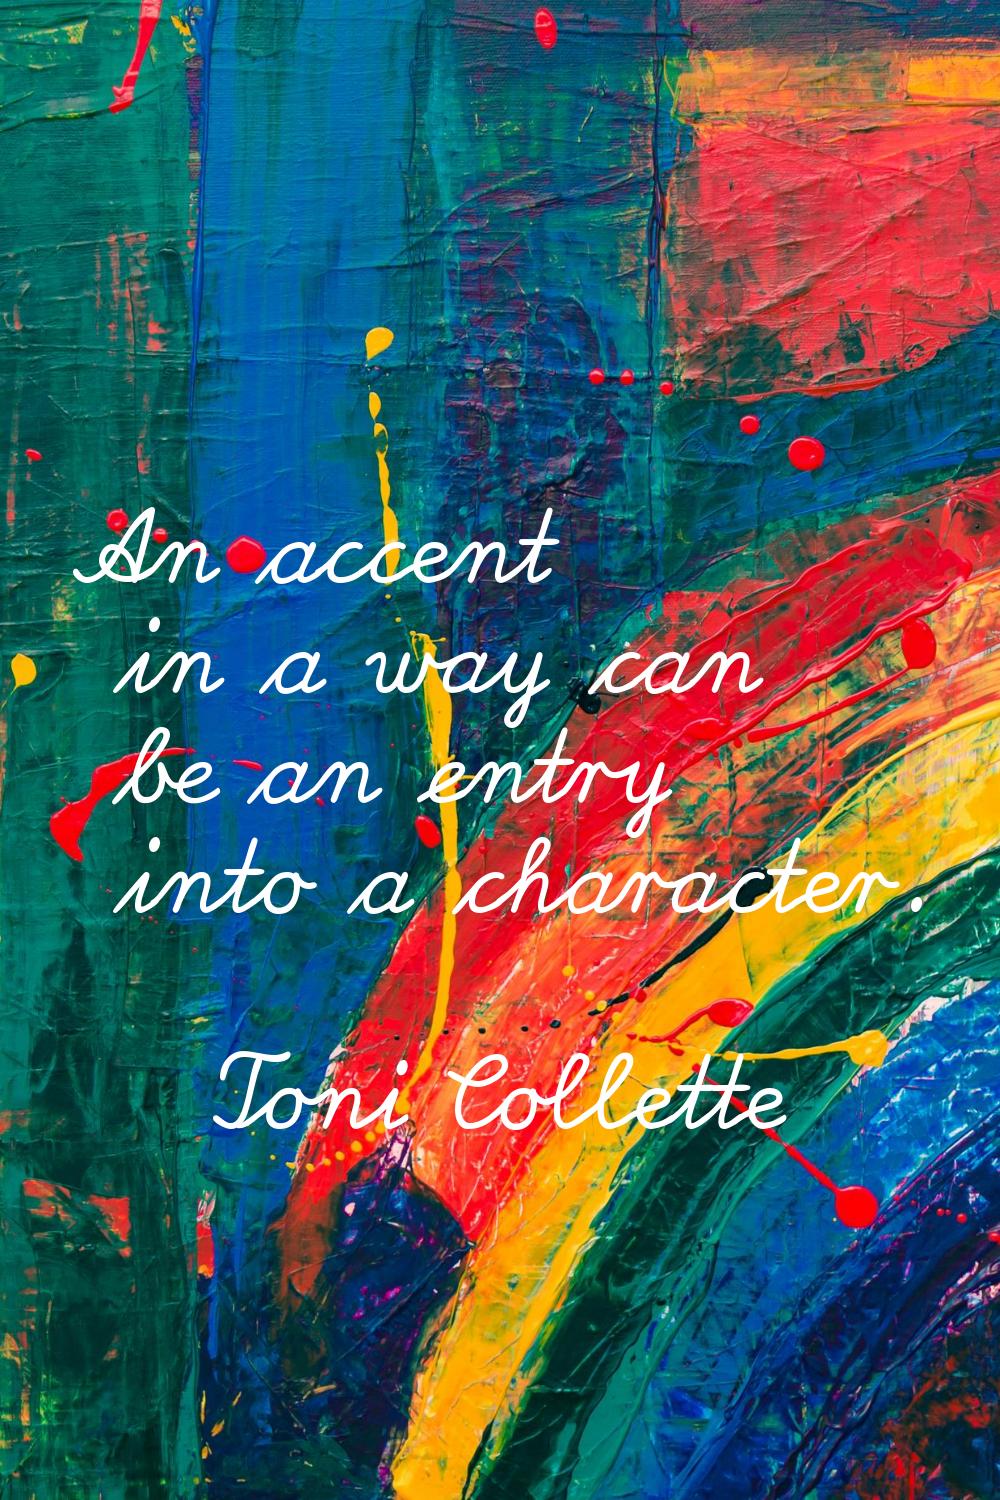 An accent in a way can be an entry into a character.